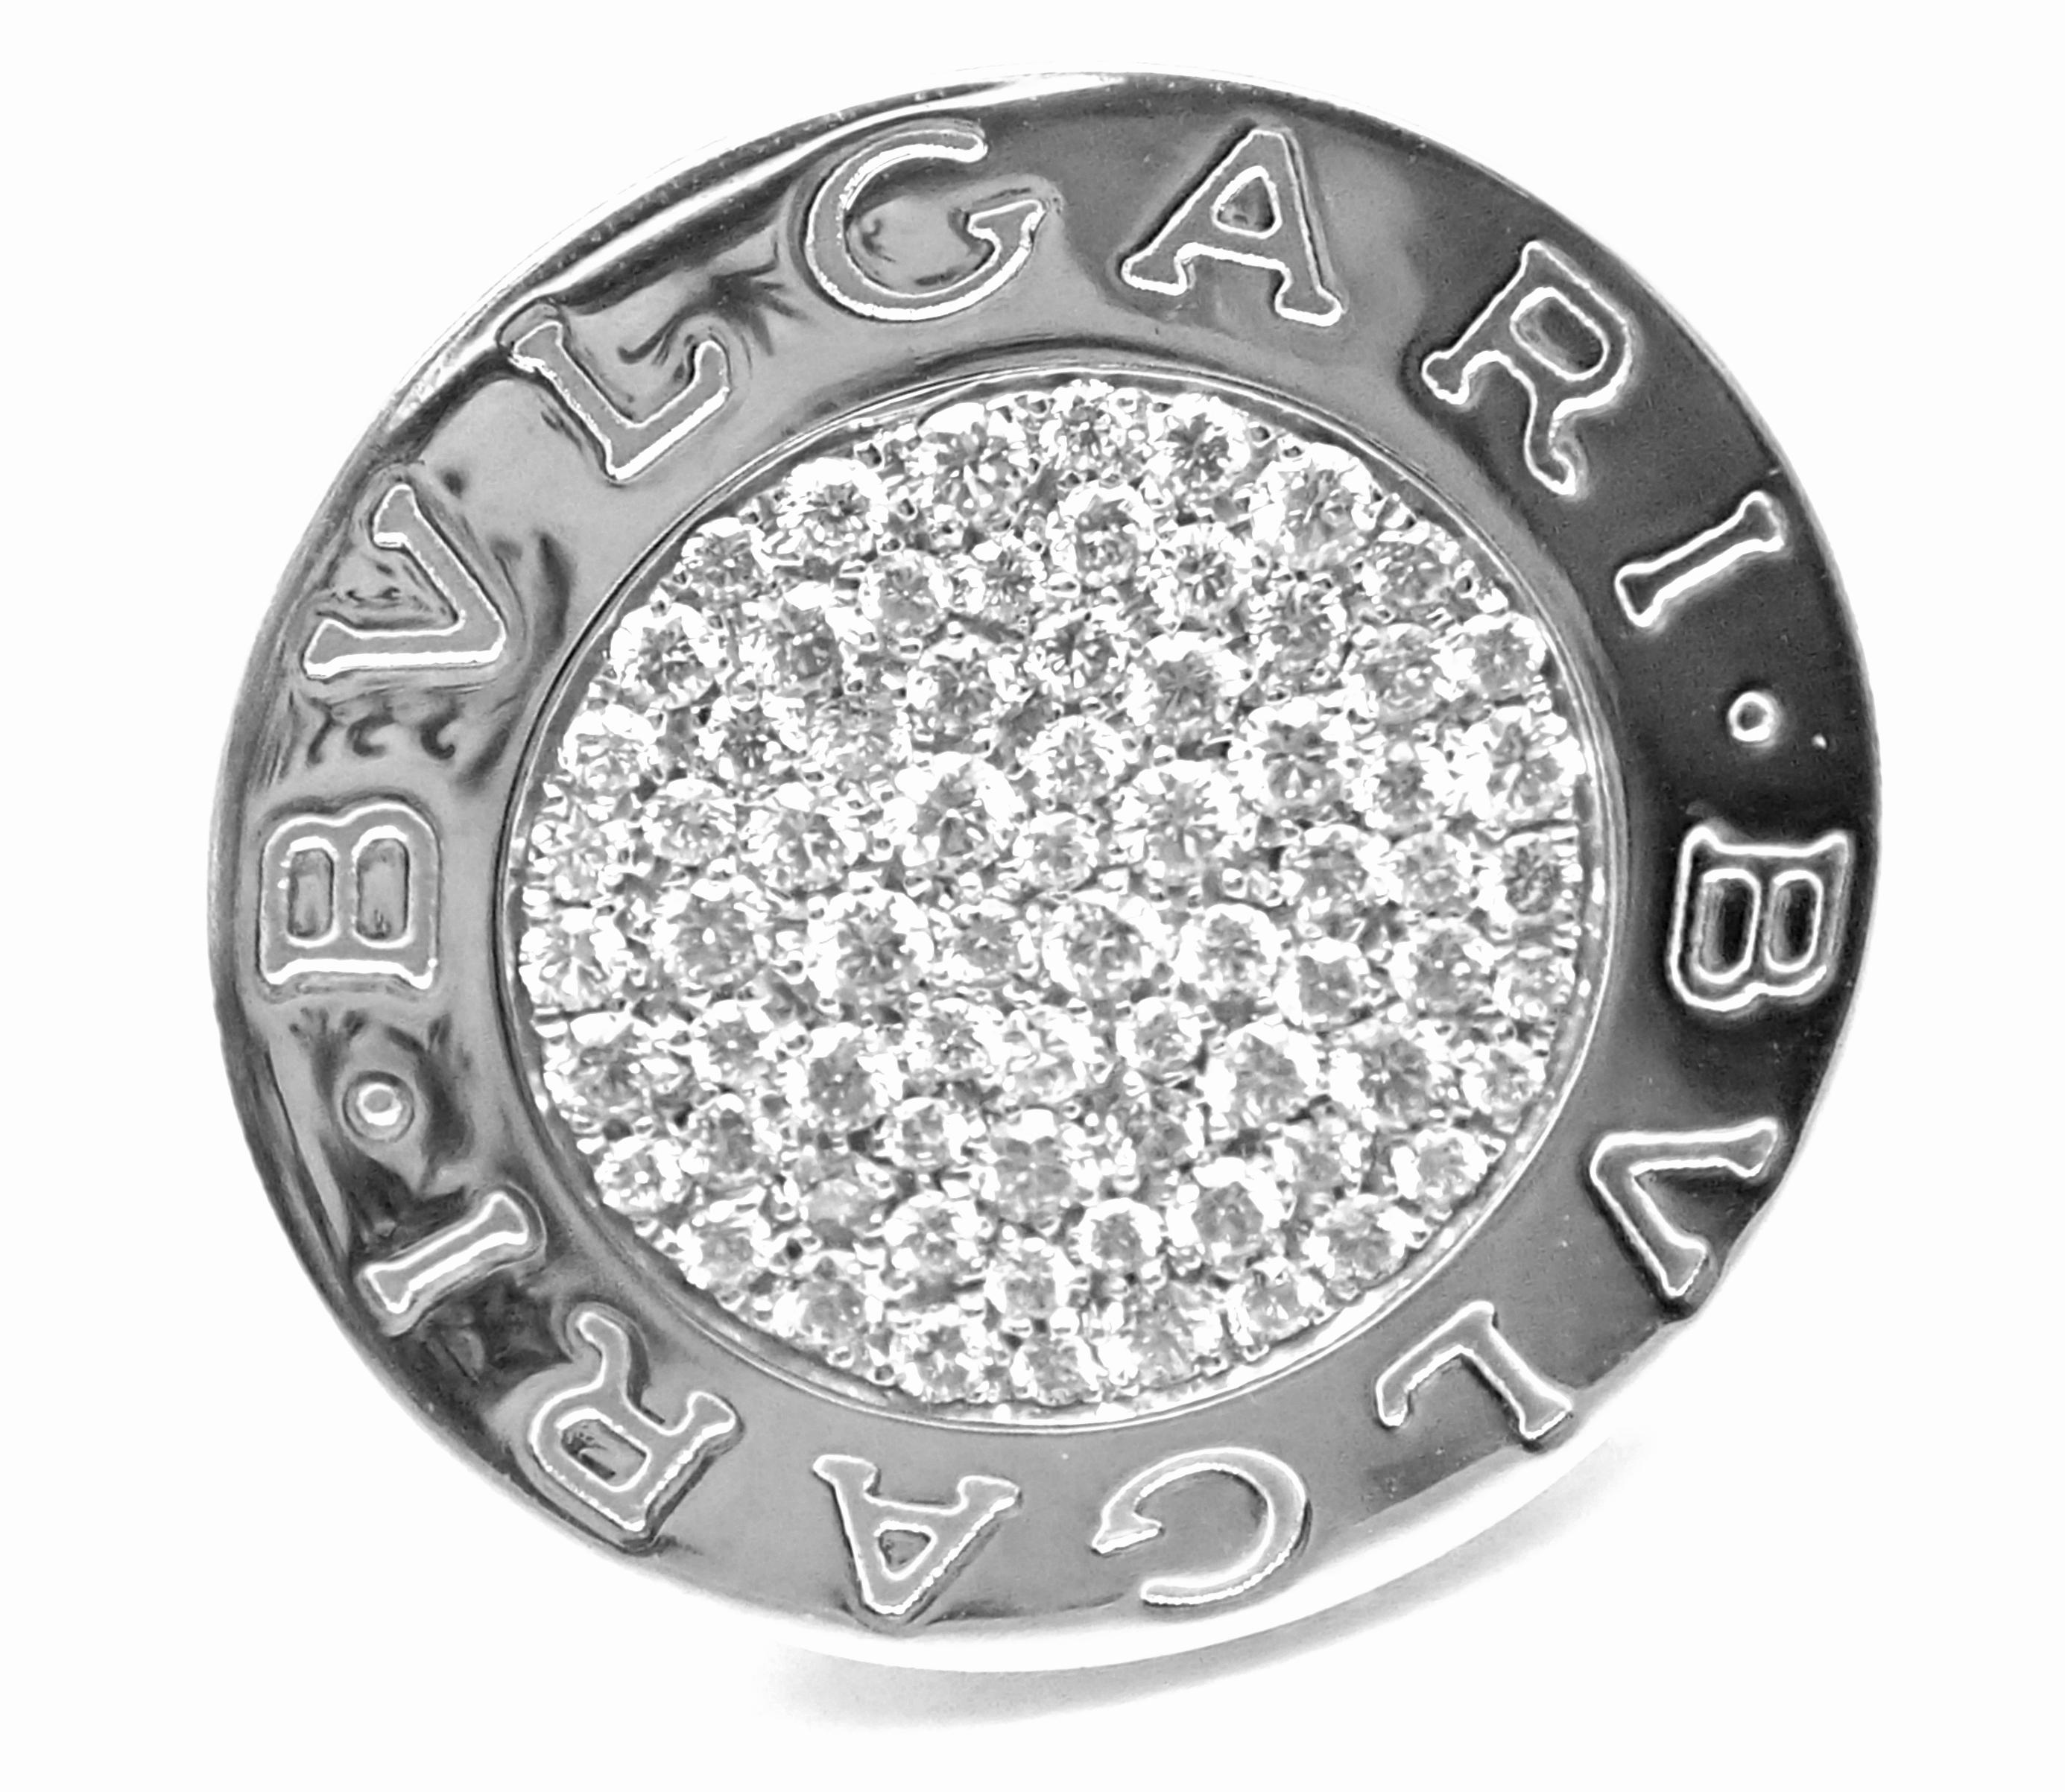 18k White Gold Diamond Ring by Bulgari. 
With 73 round brilliant cut diamonds VS1 clarity, G color total weight approximately 1.25ct
Details:
Ring Size: 6
Weight: 16.3 grams
Width: 25mm
Stamped Hallmarks: Bvlgari, Made in Italy, 750, 2337AL
*Free